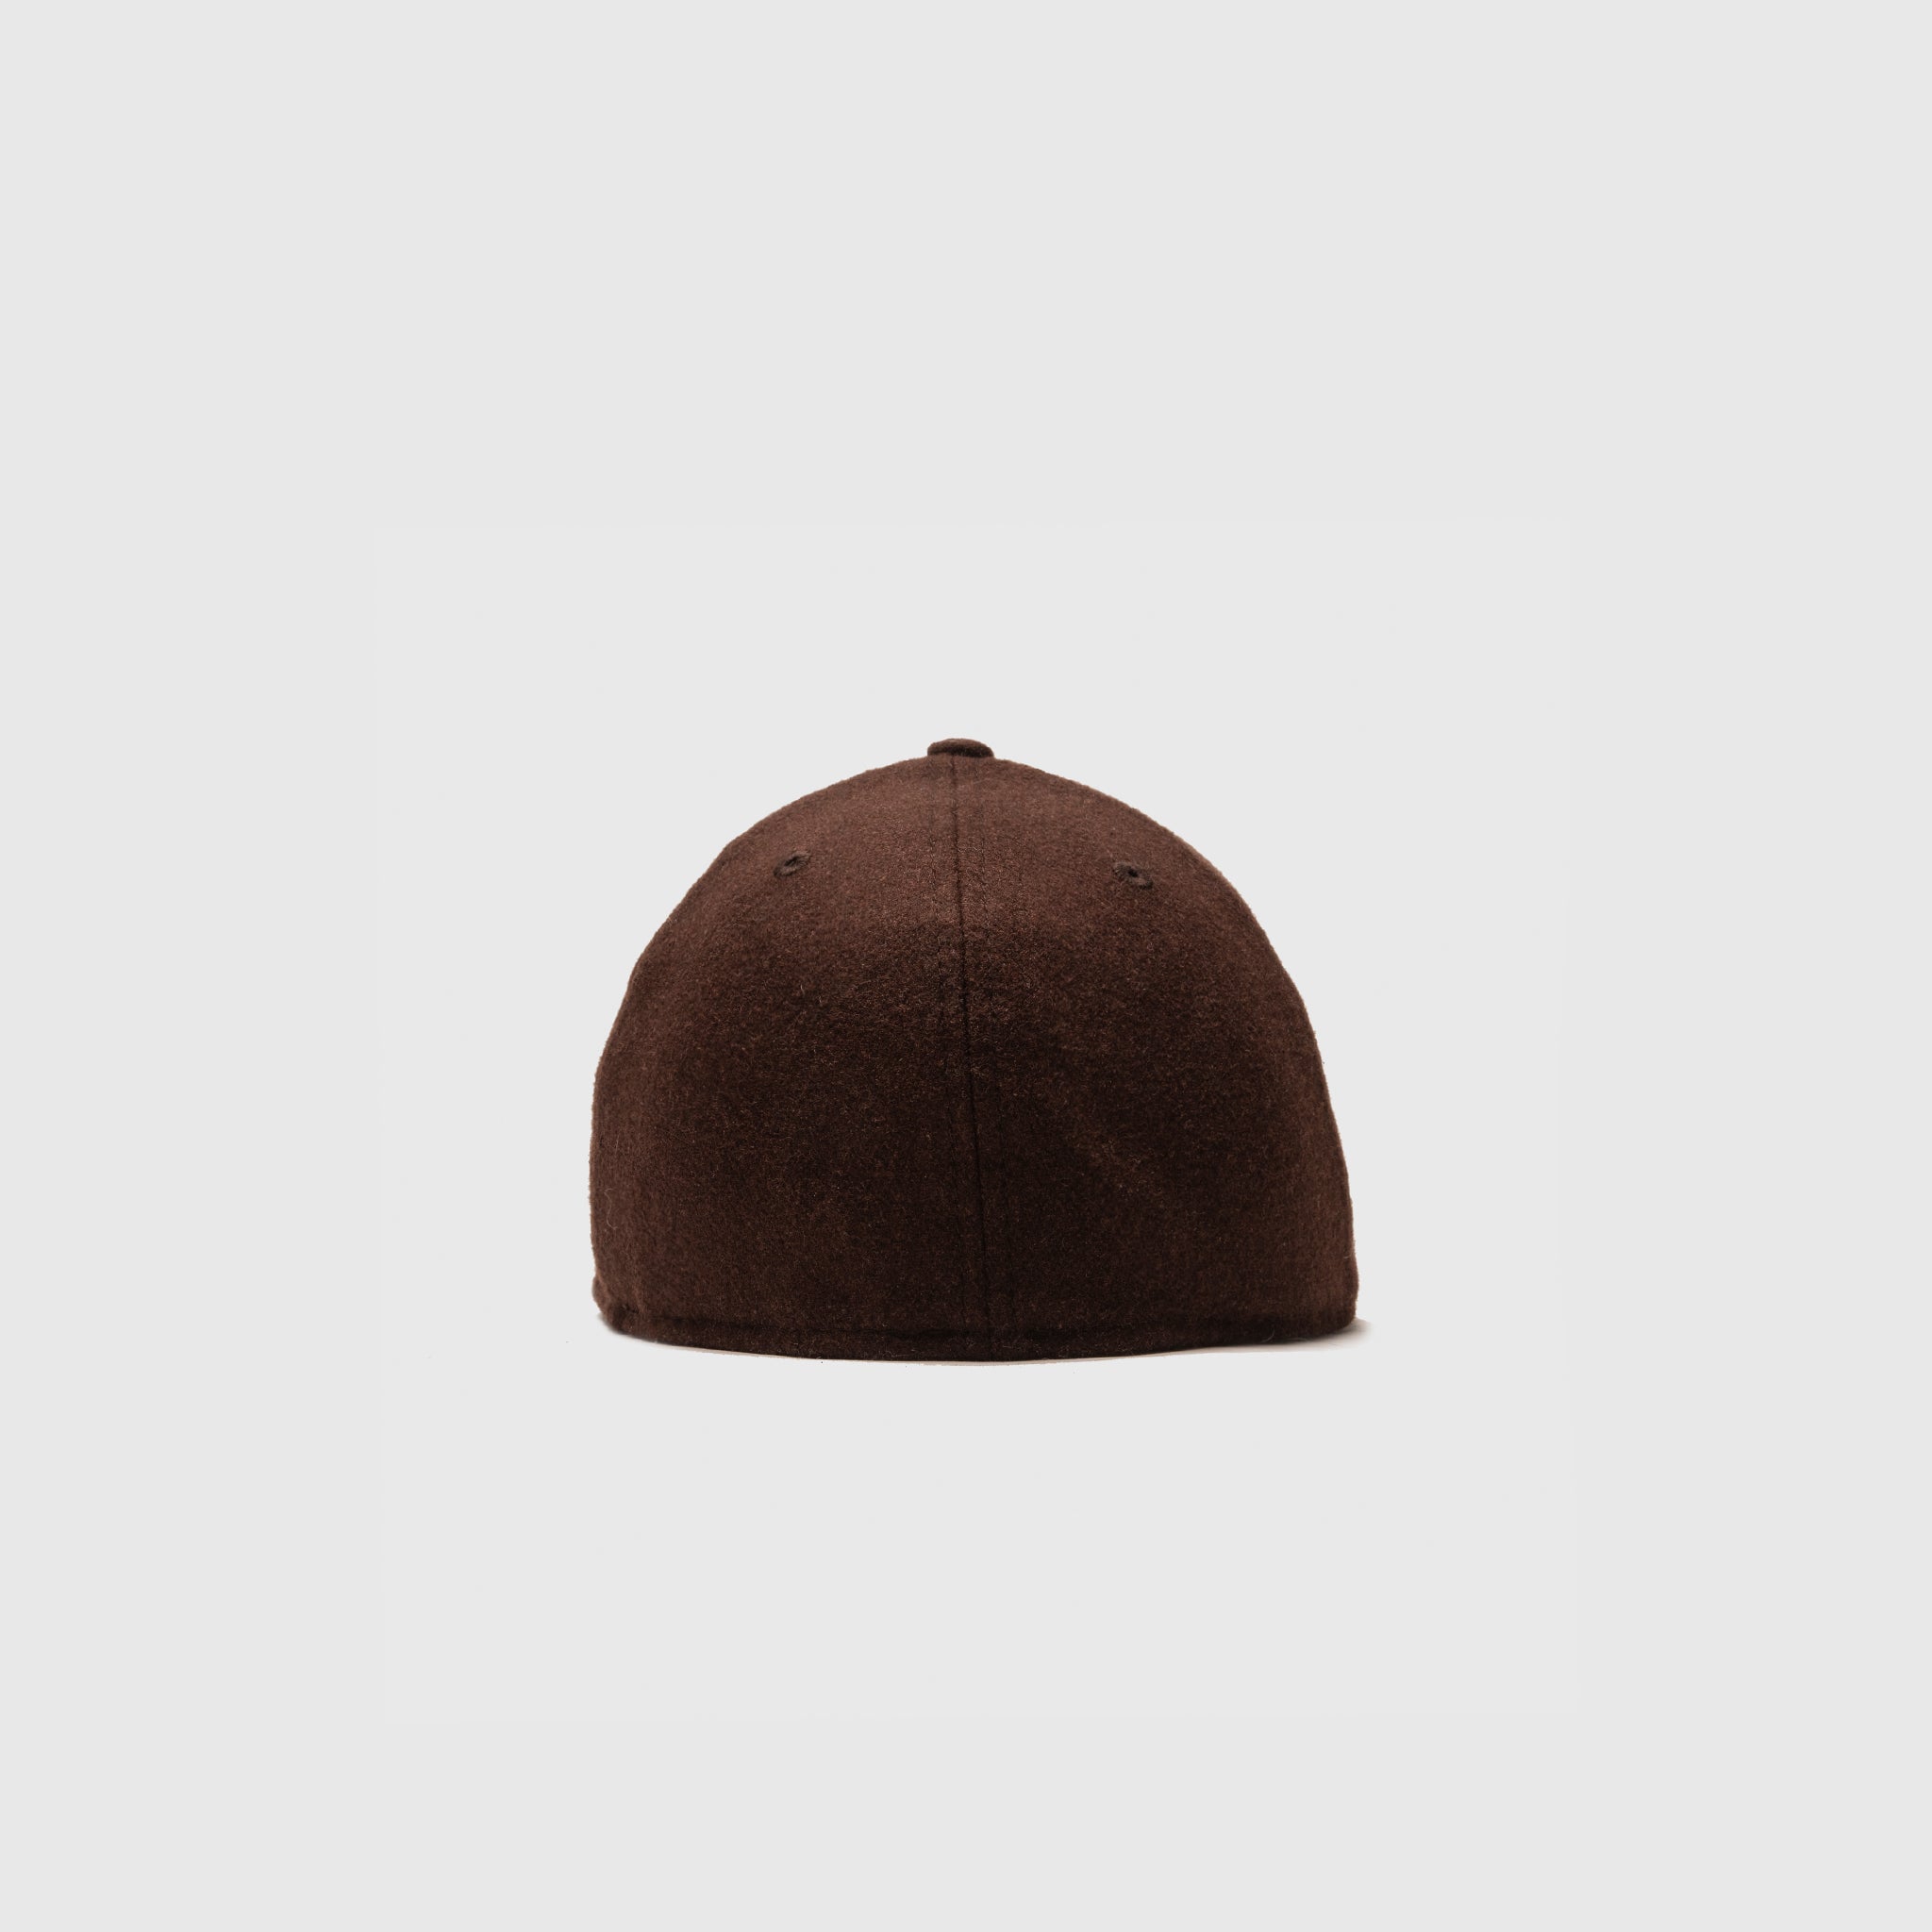 AnthonyantonellisShops X NEW ERA 59FIFTY FITTED "CHOCOLATE"